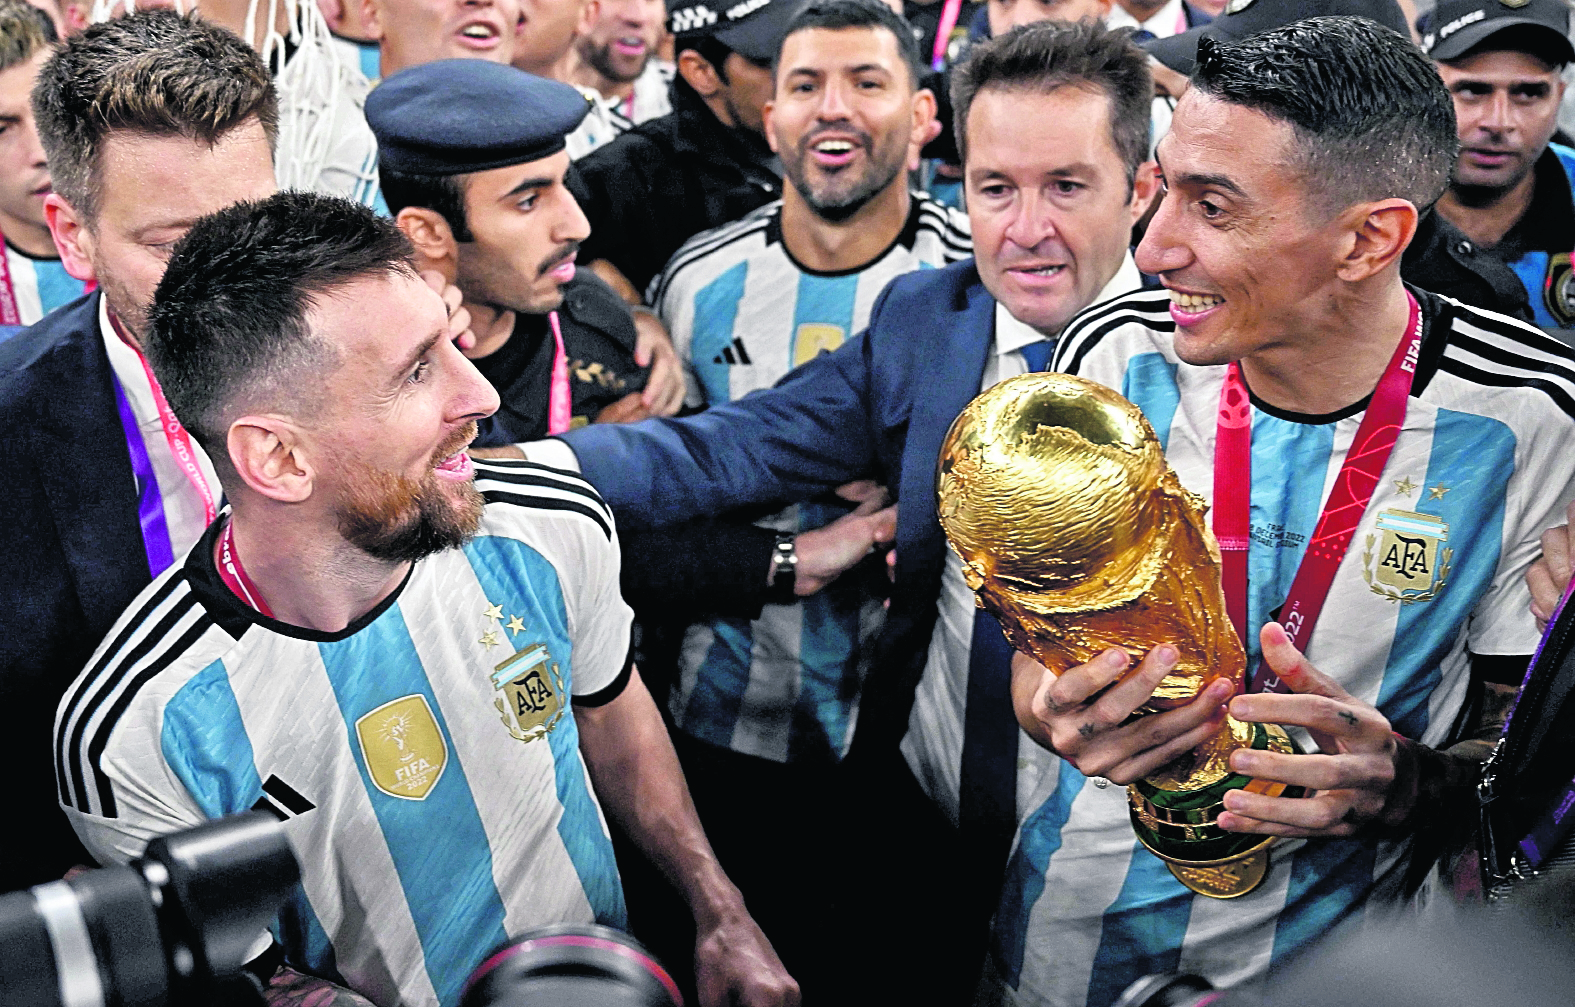 (FILES) Argentina's midfielder #11 Angel Di Maria (R) holds the FIFA World Cup Trophy as he speaks to Argentina's forward #10 Lionel Messi (L) following the trophy ceremony after Argentina won the Qatar 2022 World Cup final football match between Argentina and France at Lusail Stadium in Lusail, north of Doha on December 18, 2022. The American and world champion Angel Di Maria announced on November 23, 20223 that he will leave the Argentine football team after playing the 2024 Copa America in the United States. "With all the pain in my soul and feeling a lump in my throat, I say goodbye to the most beautiful thing that happened to me in my career", said "Fideo" Di Maria, 35, in a message published on the social network Instagram. (Photo by Anne-Christine POUJOULAT / AFP)